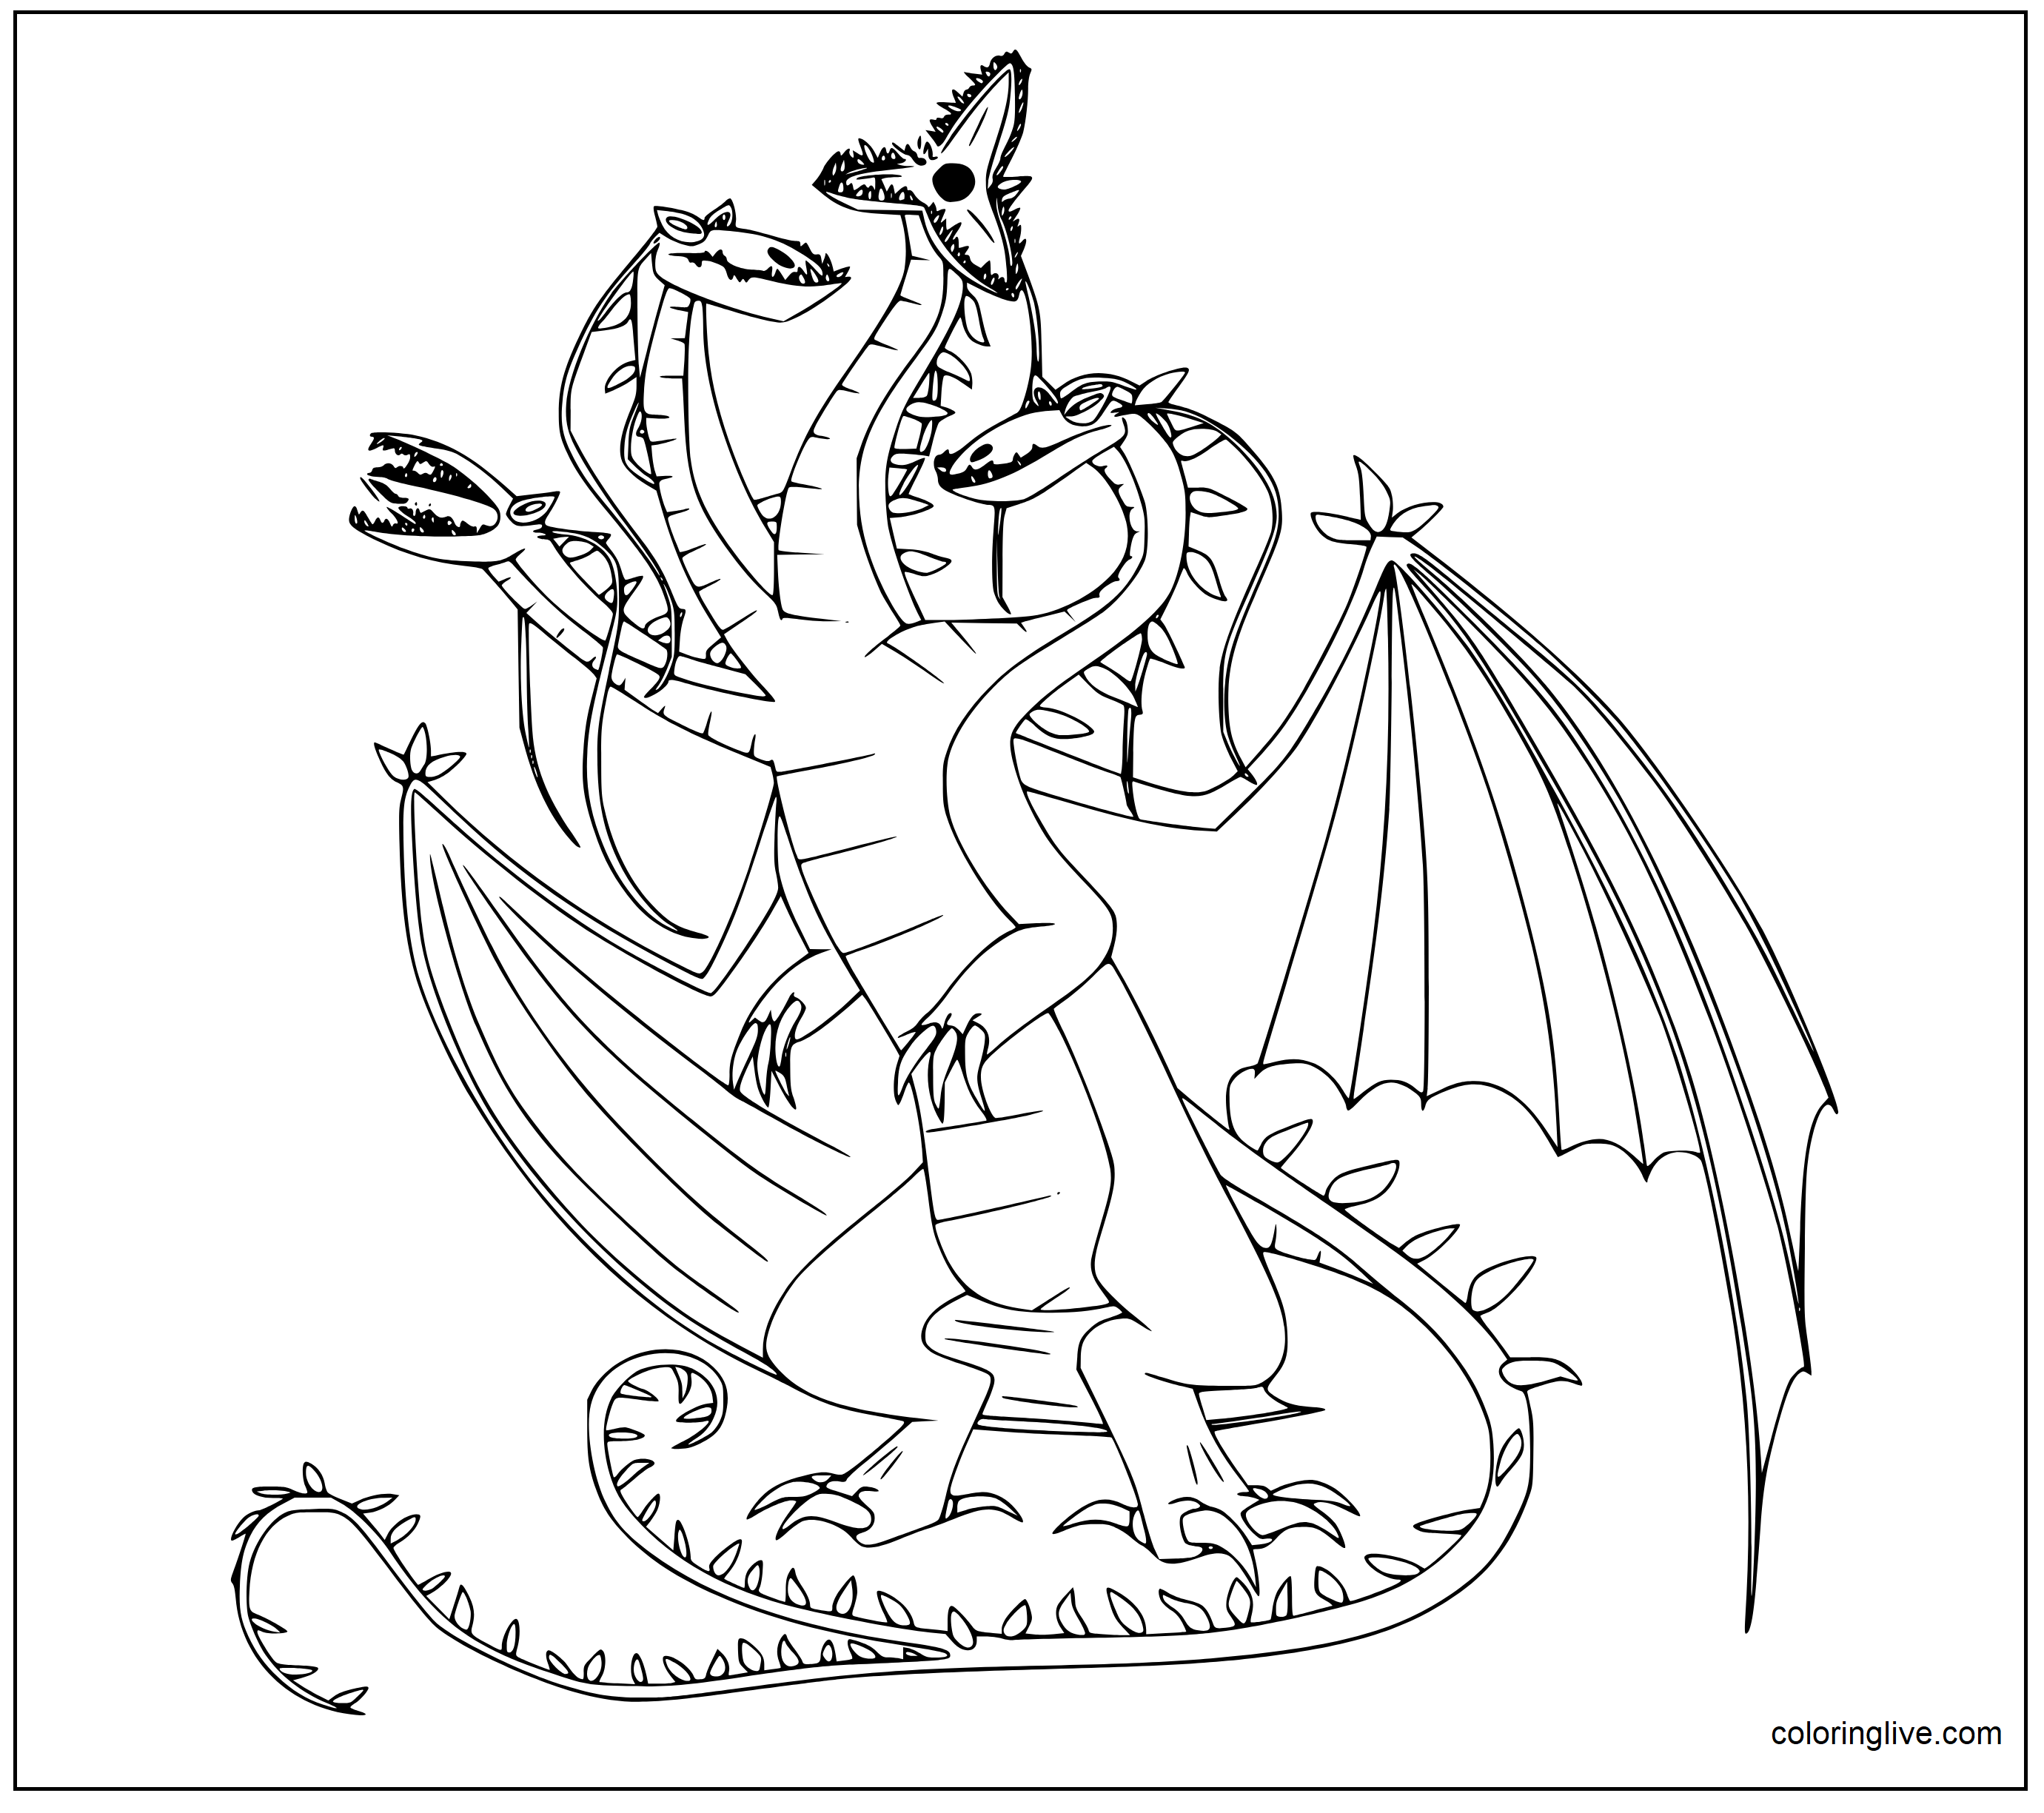 Printable Three-head dragon Coloring Page for kids.